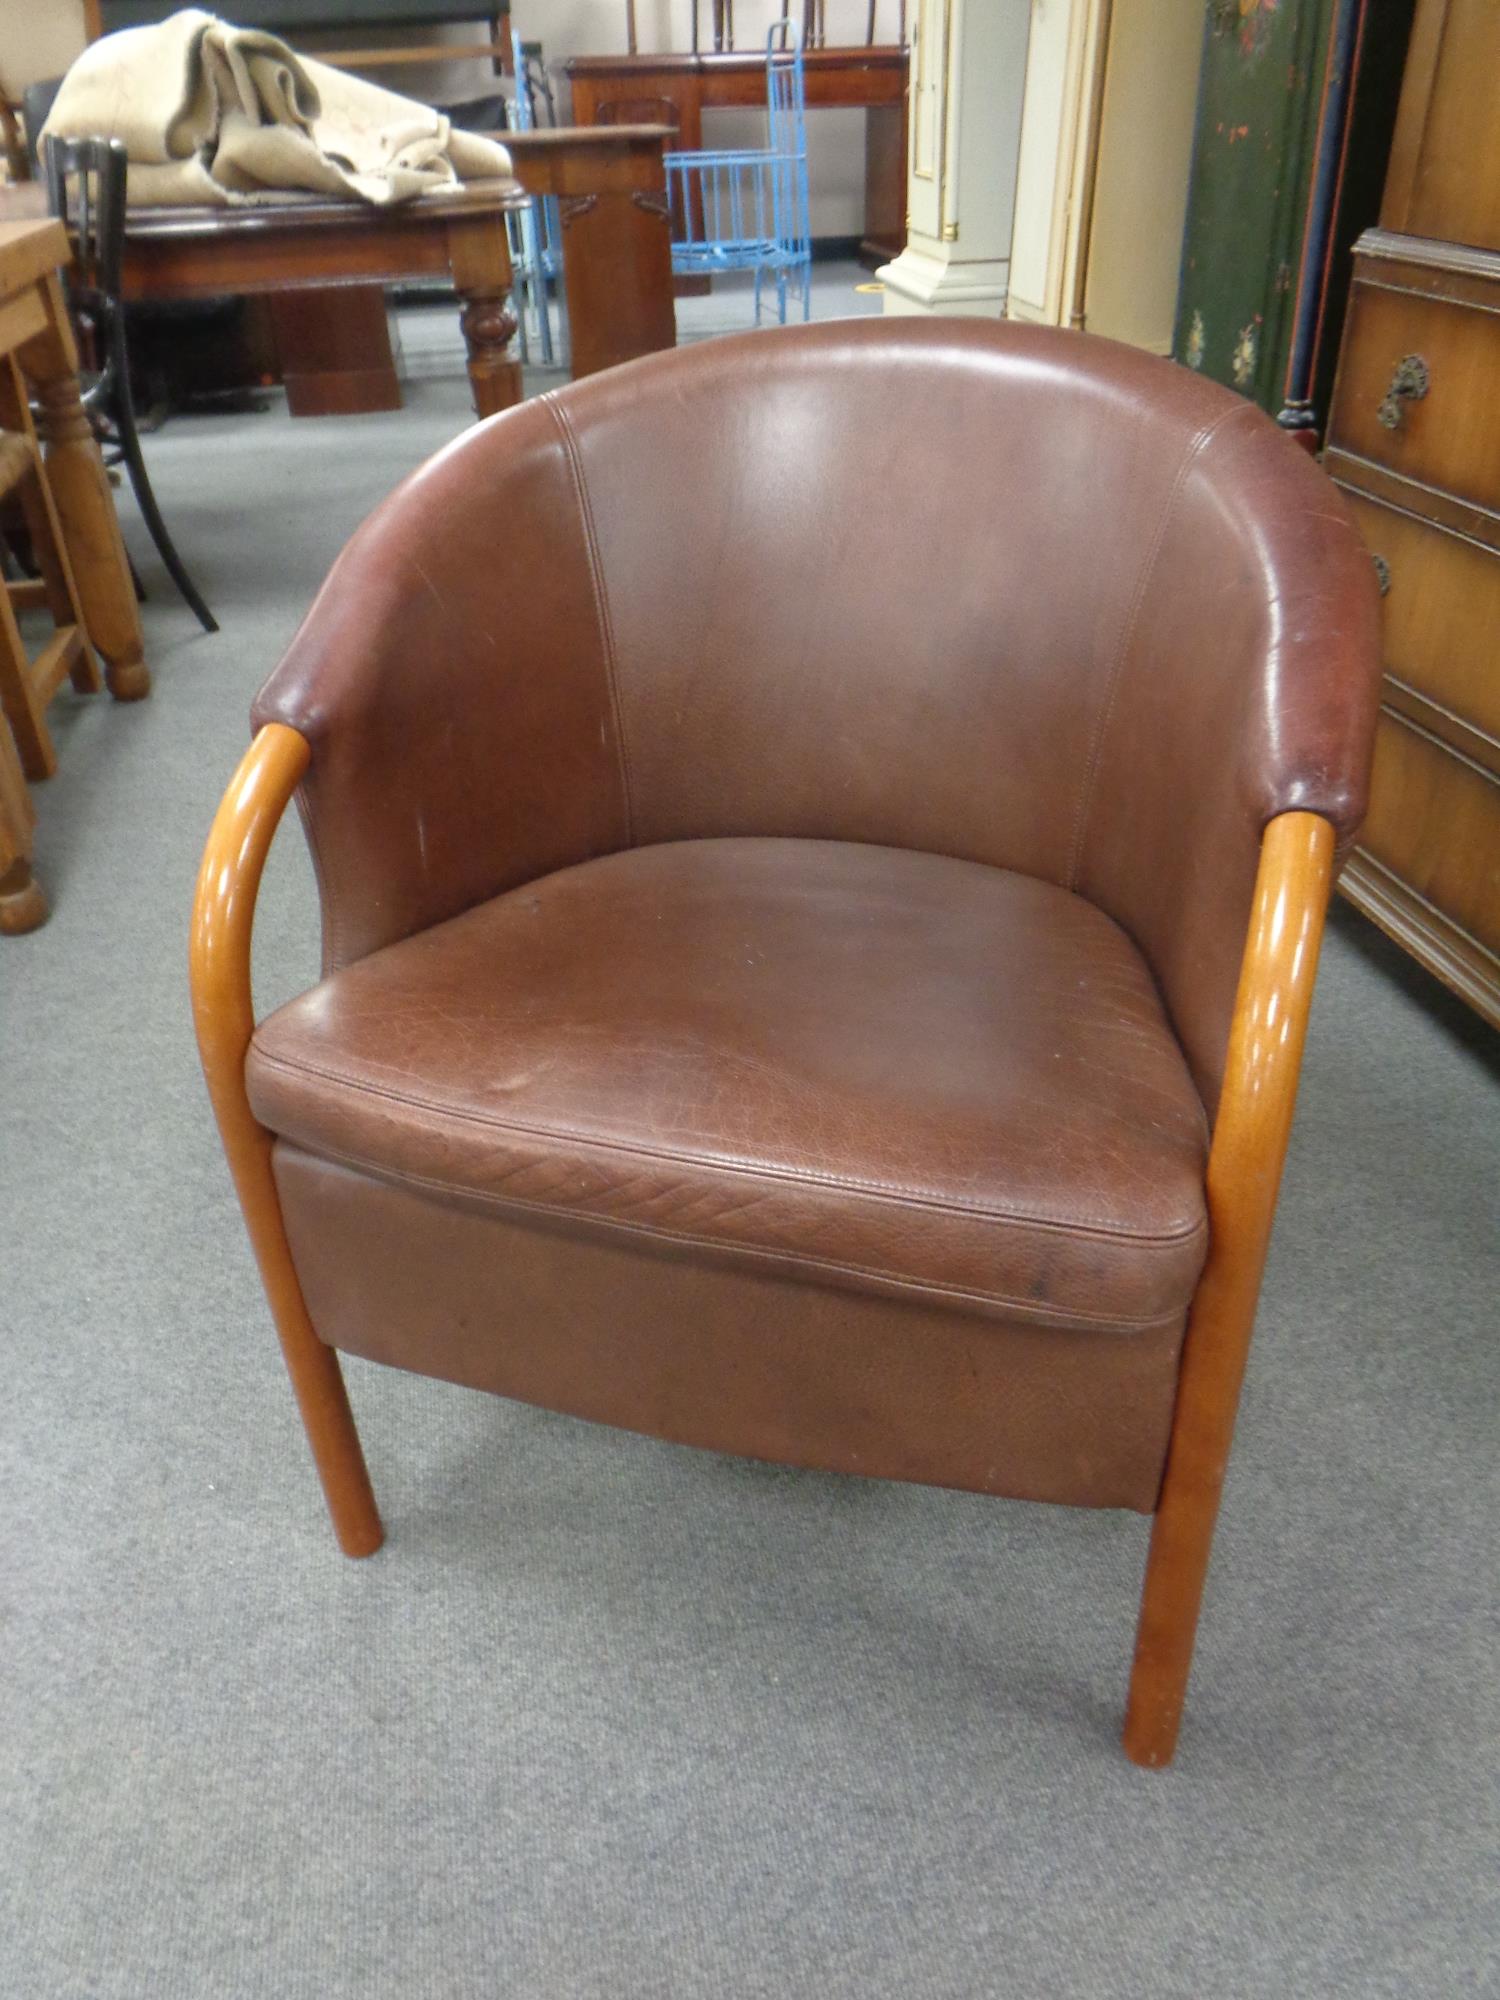 A tub chair upholstered in maroon leather